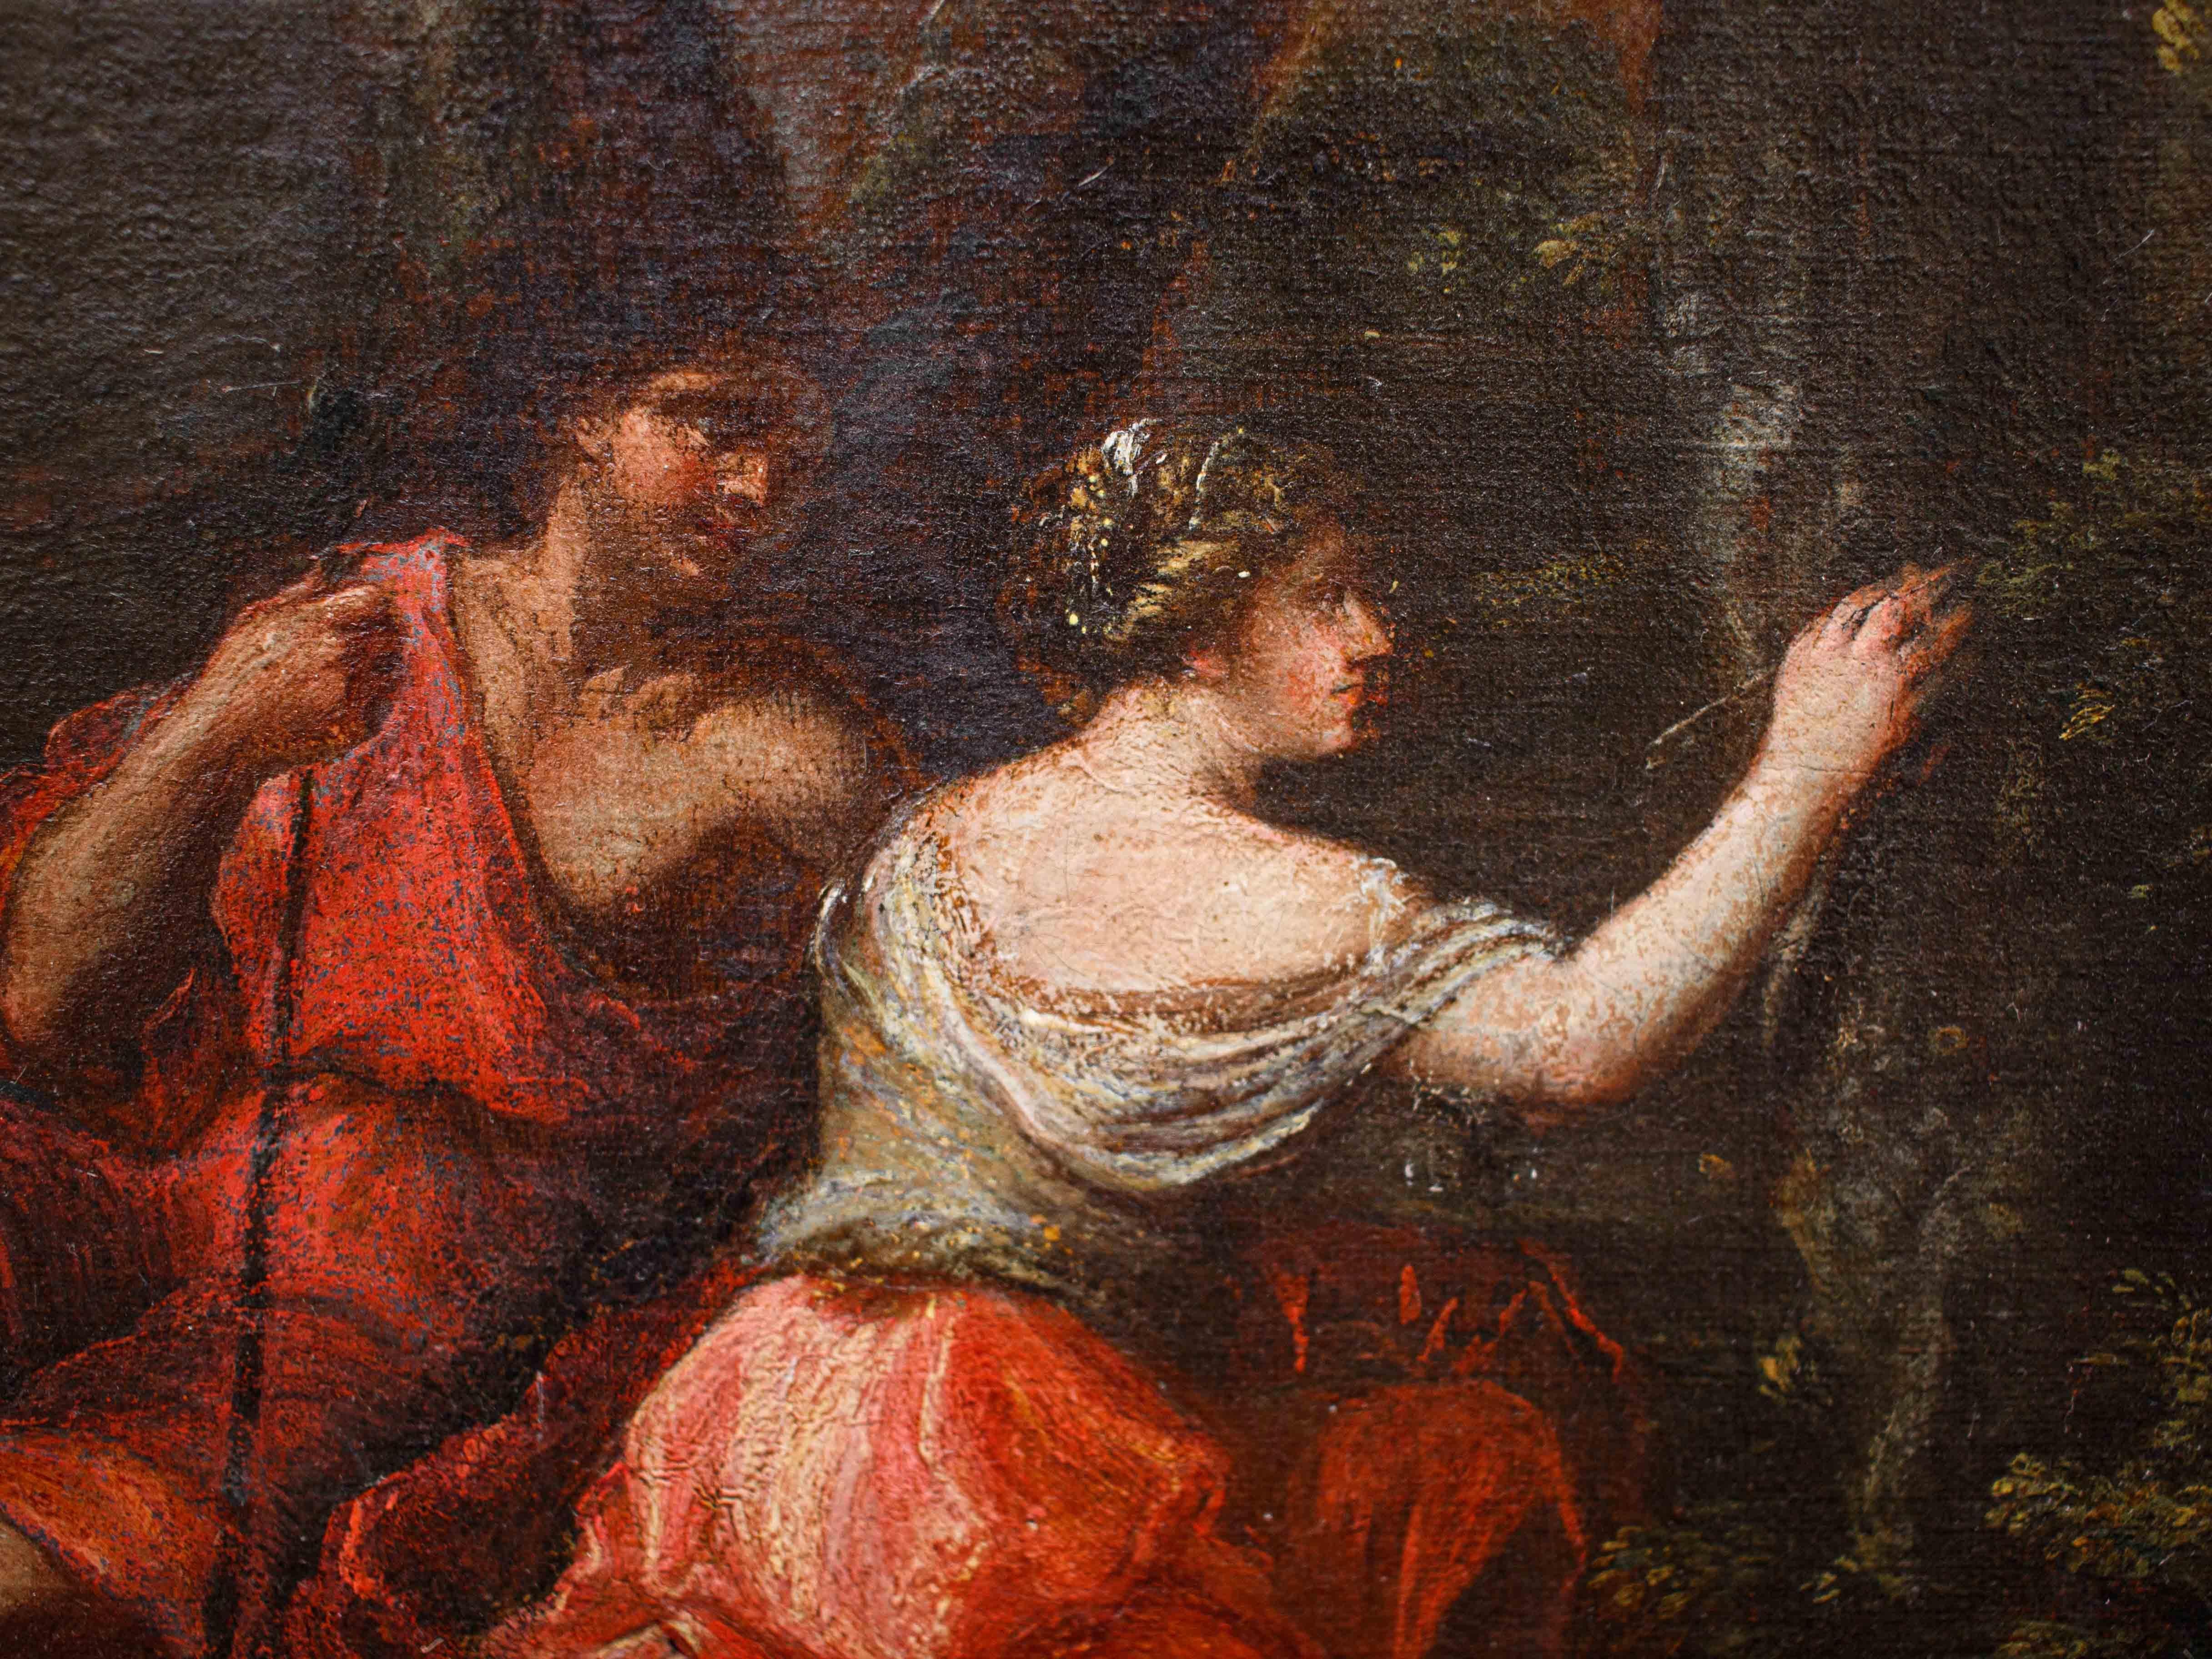 Roman School, 17th century
Angelica and Medoro engrave their names on the bark of a tree
Oil on canvas, 65 x 48.5 cm 



The canvas depicts one of the most famous episodes of Orlando Furioso, a chivalrous poem by Ludovico Ariosto, published in